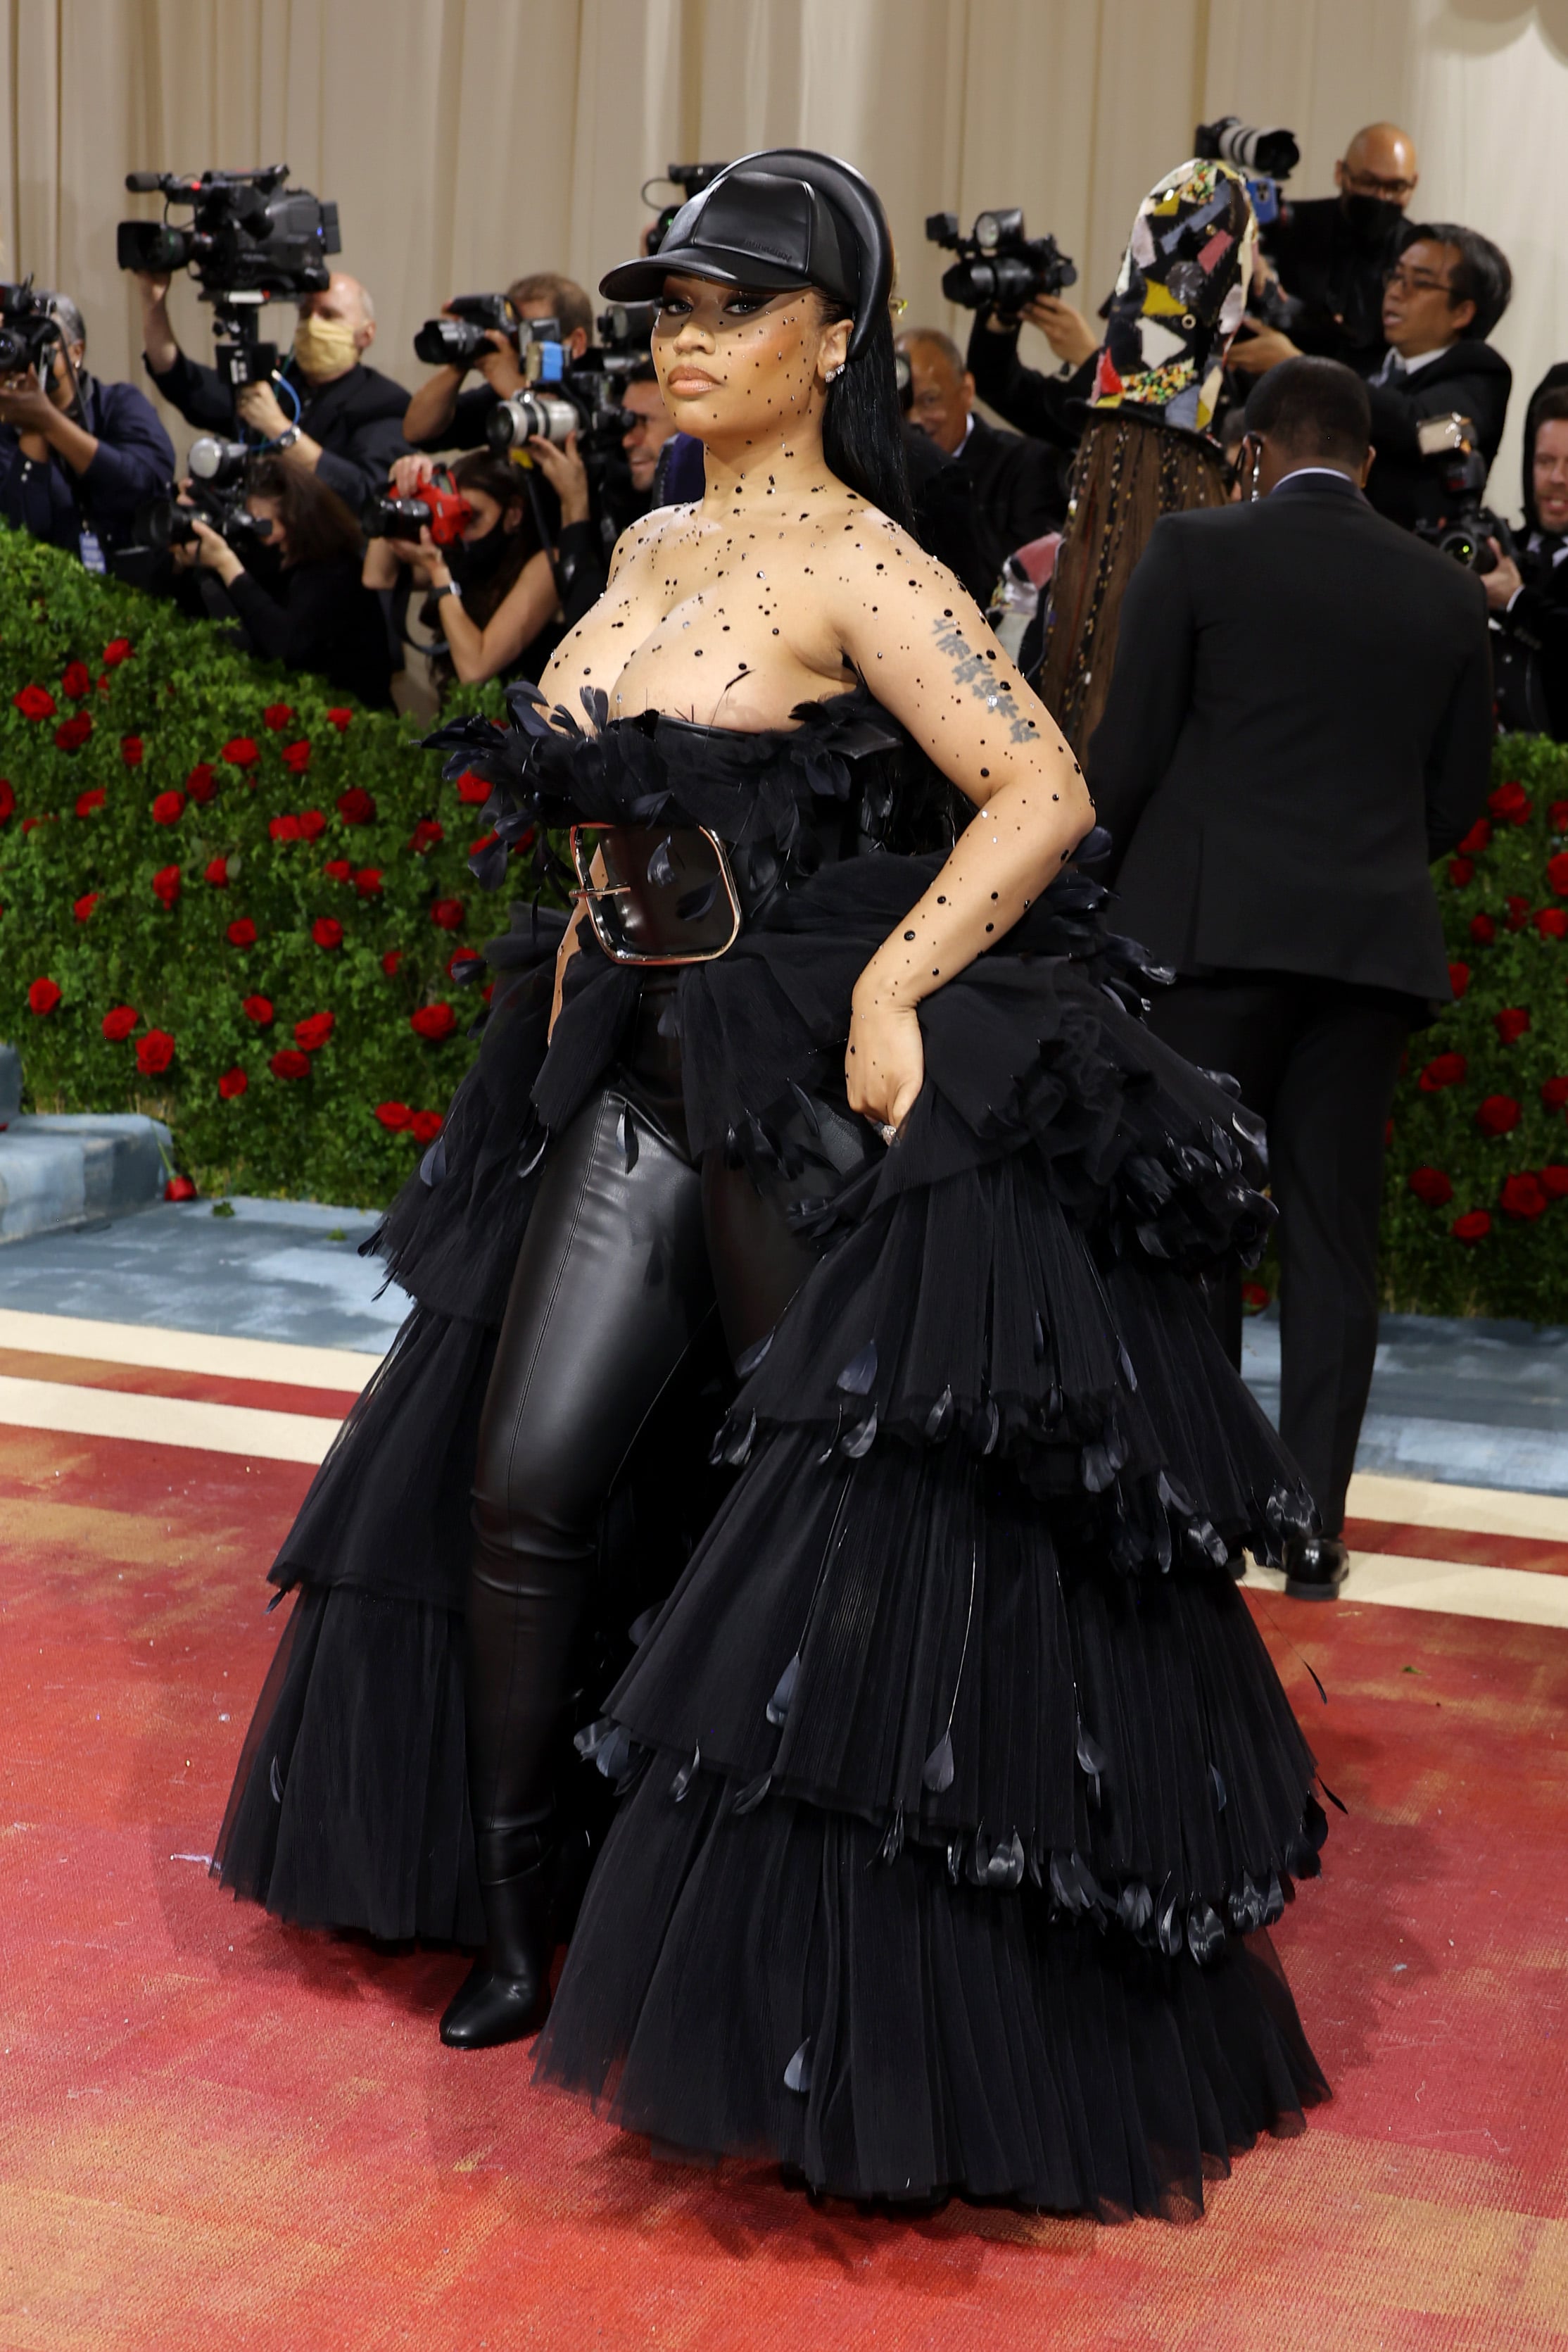 Met Gala 2022: See what celebrities wore for fashion's biggest night - ABC  News